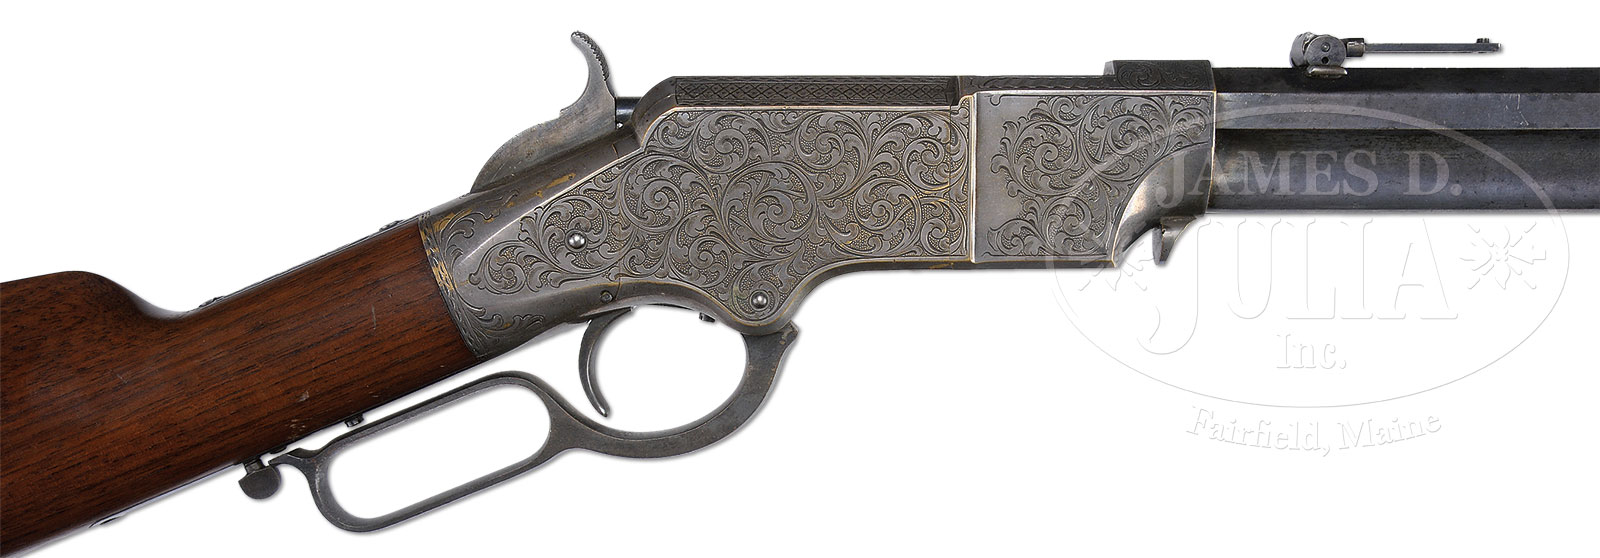 MAGNIFICENT HOGGSON DELUXE ENGRAVED HENRY RIFLE WITH FULL SILVER PLATING.